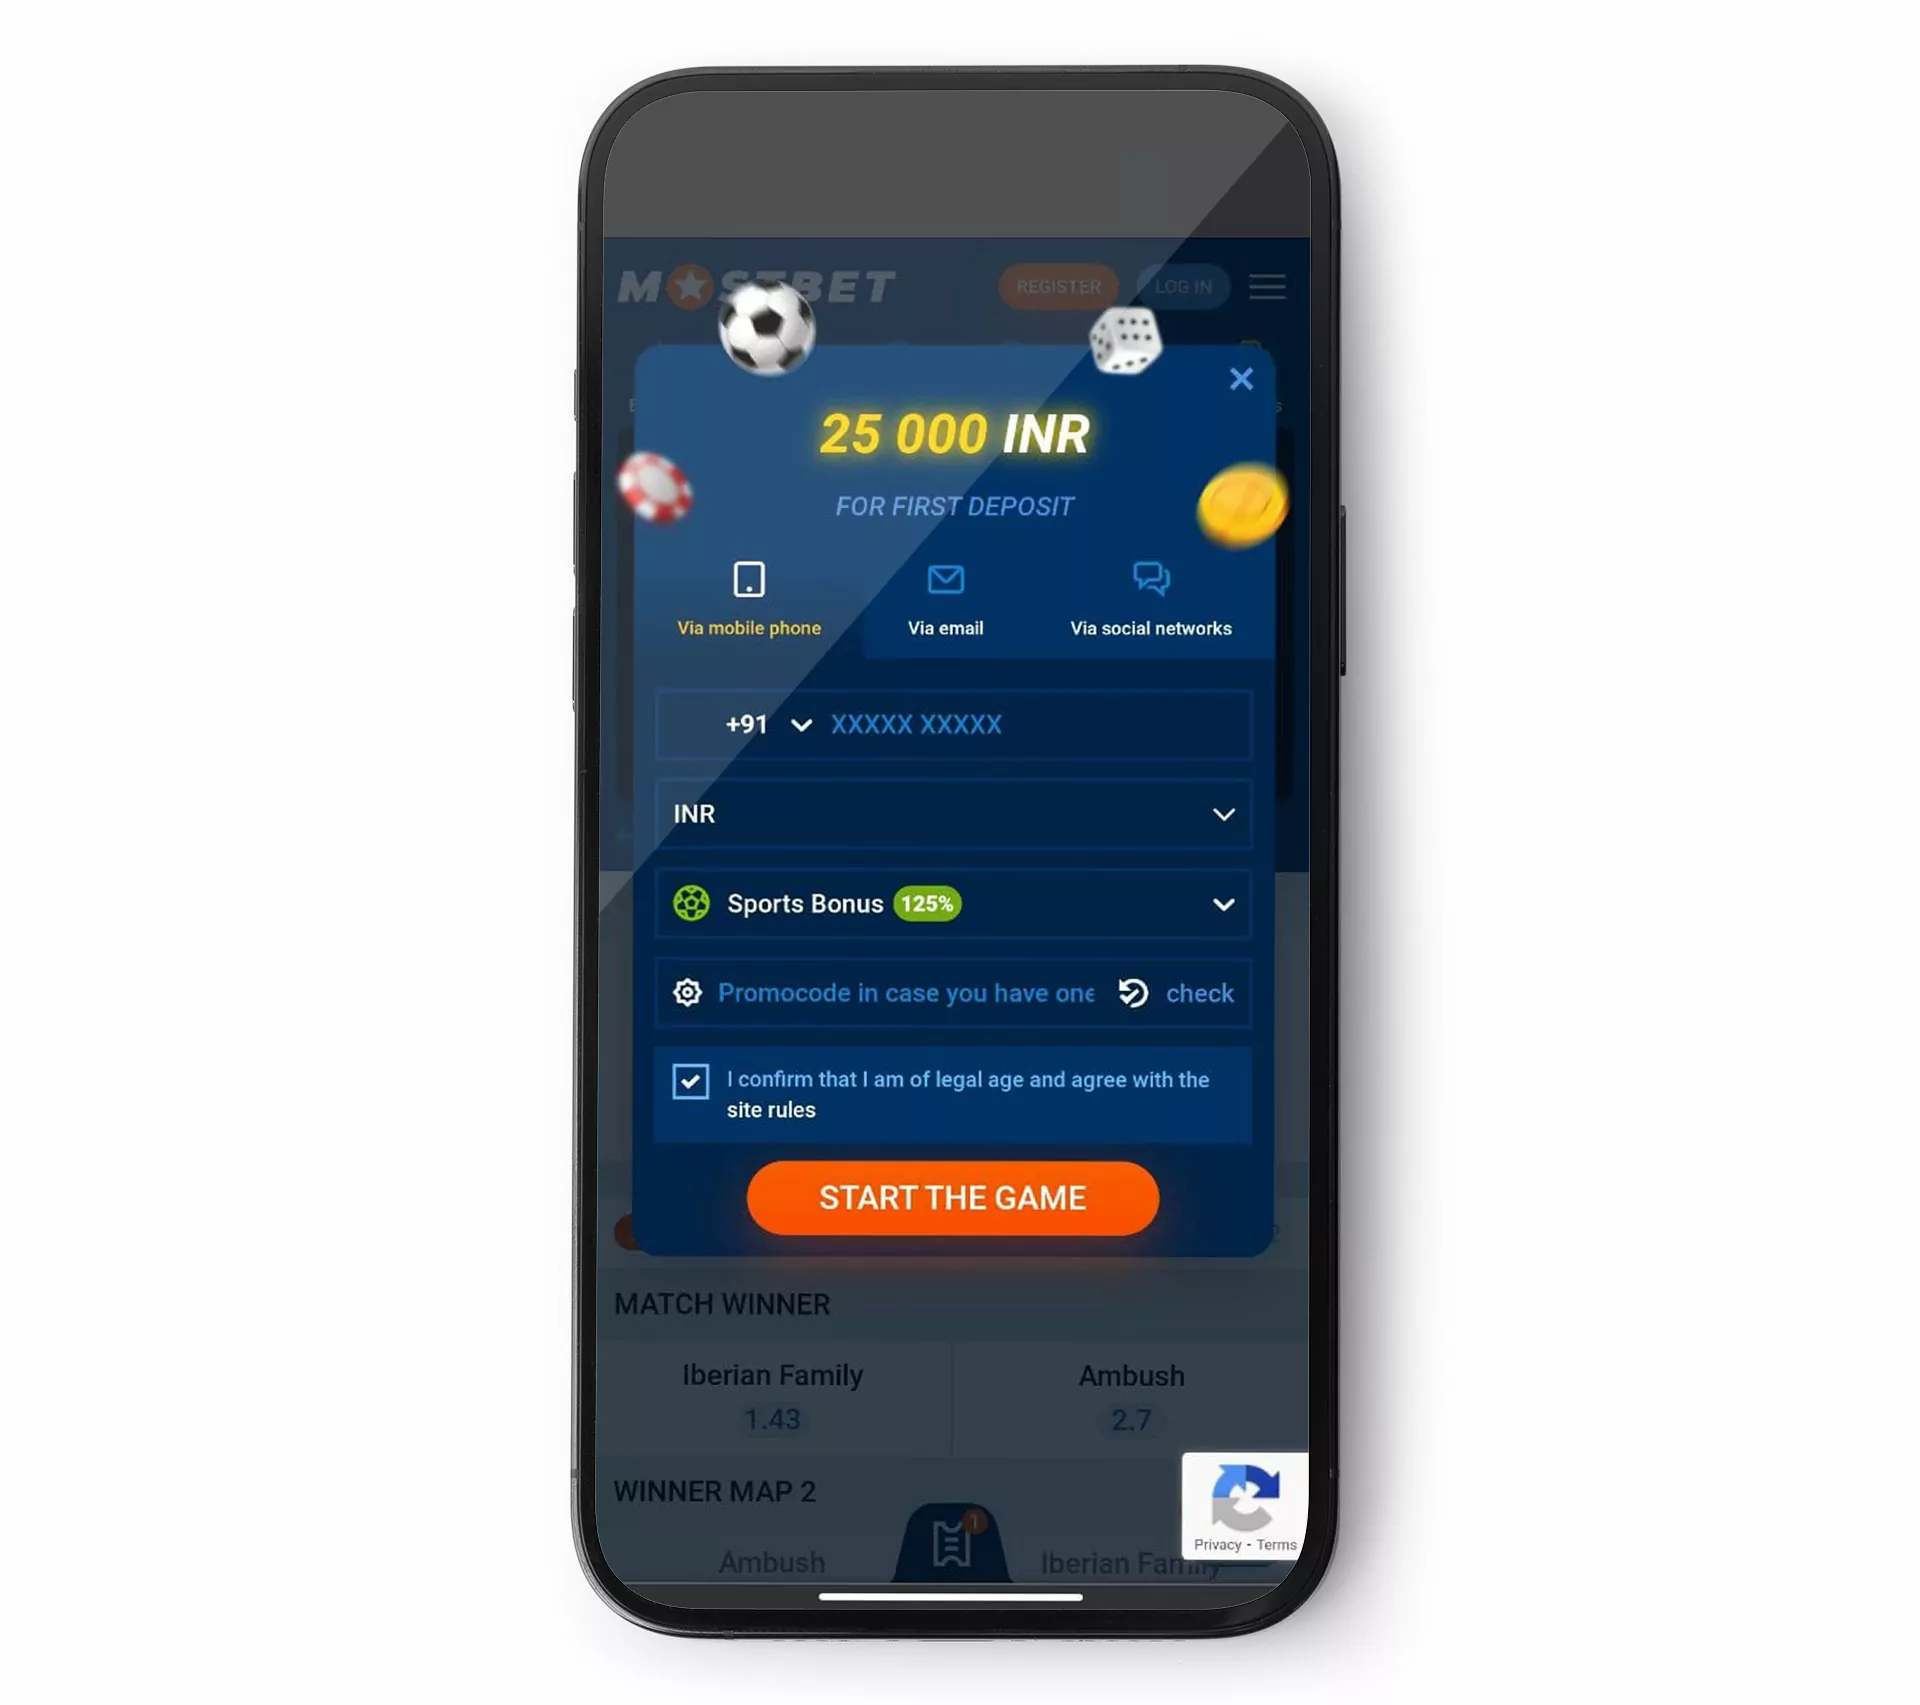 Sign up for Mostbet.